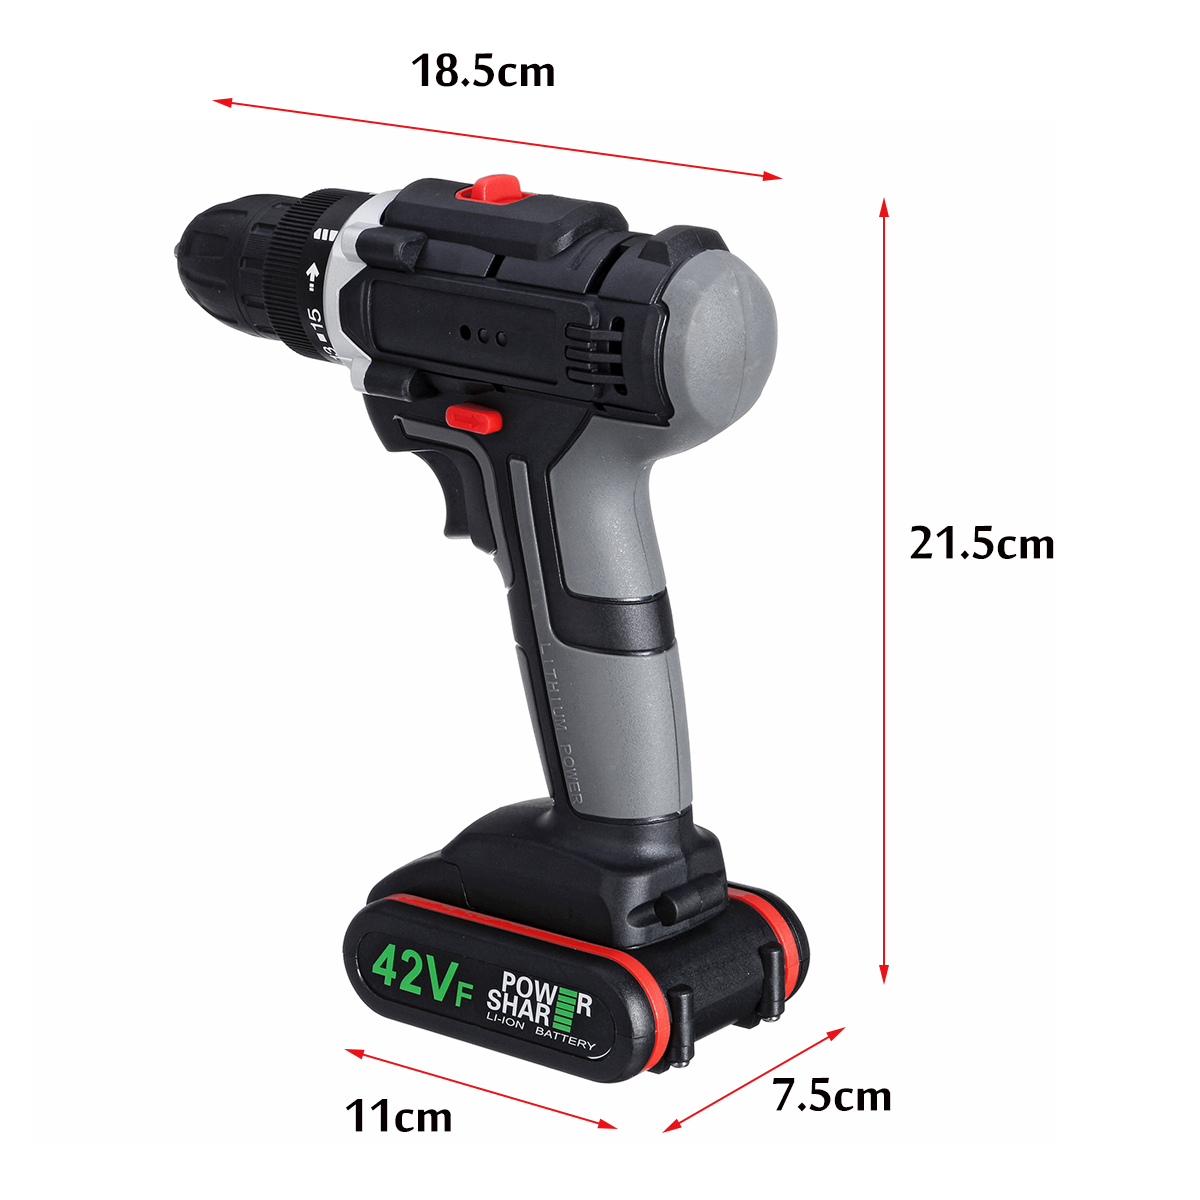 7500mAh-Multifunctional-Electric-Drill-Dual-Speed-Cordless-Power-Screwdriver-Set-with-Li-ion-Battery-1474478-2